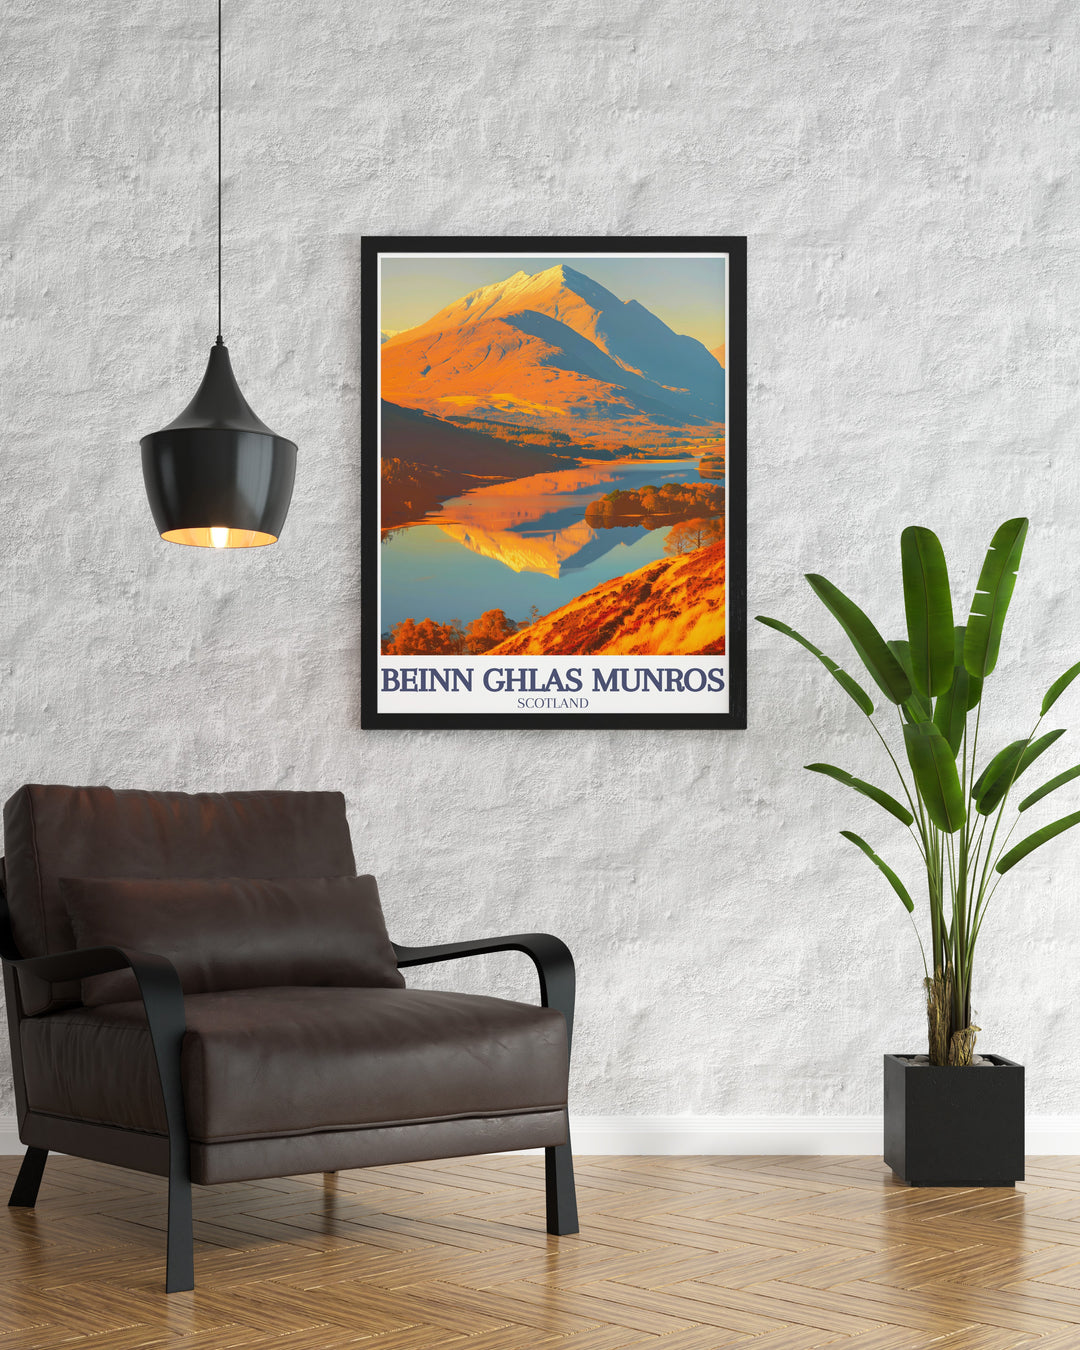 Beinn Ghlas and Ben Lawers poster with Loch Tay in the background highlighting the picturesque views of the Scottish Highlands. A great addition to any wall art collection for lovers of nature and adventure.